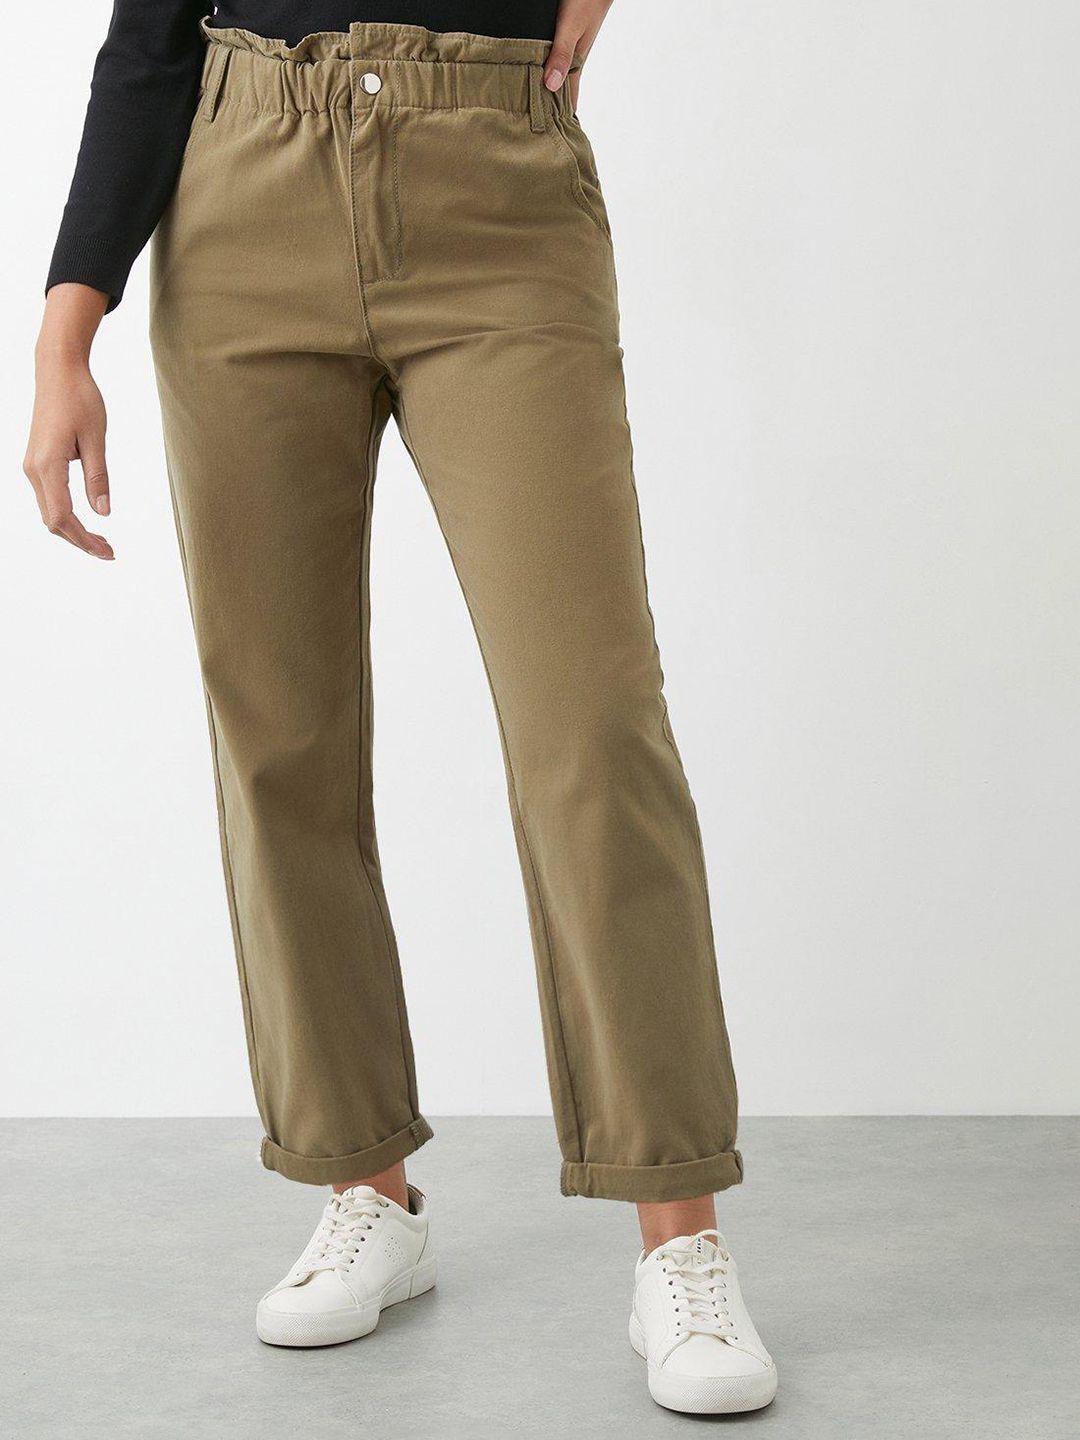 dorothy perkins women cotton paperbag trousers